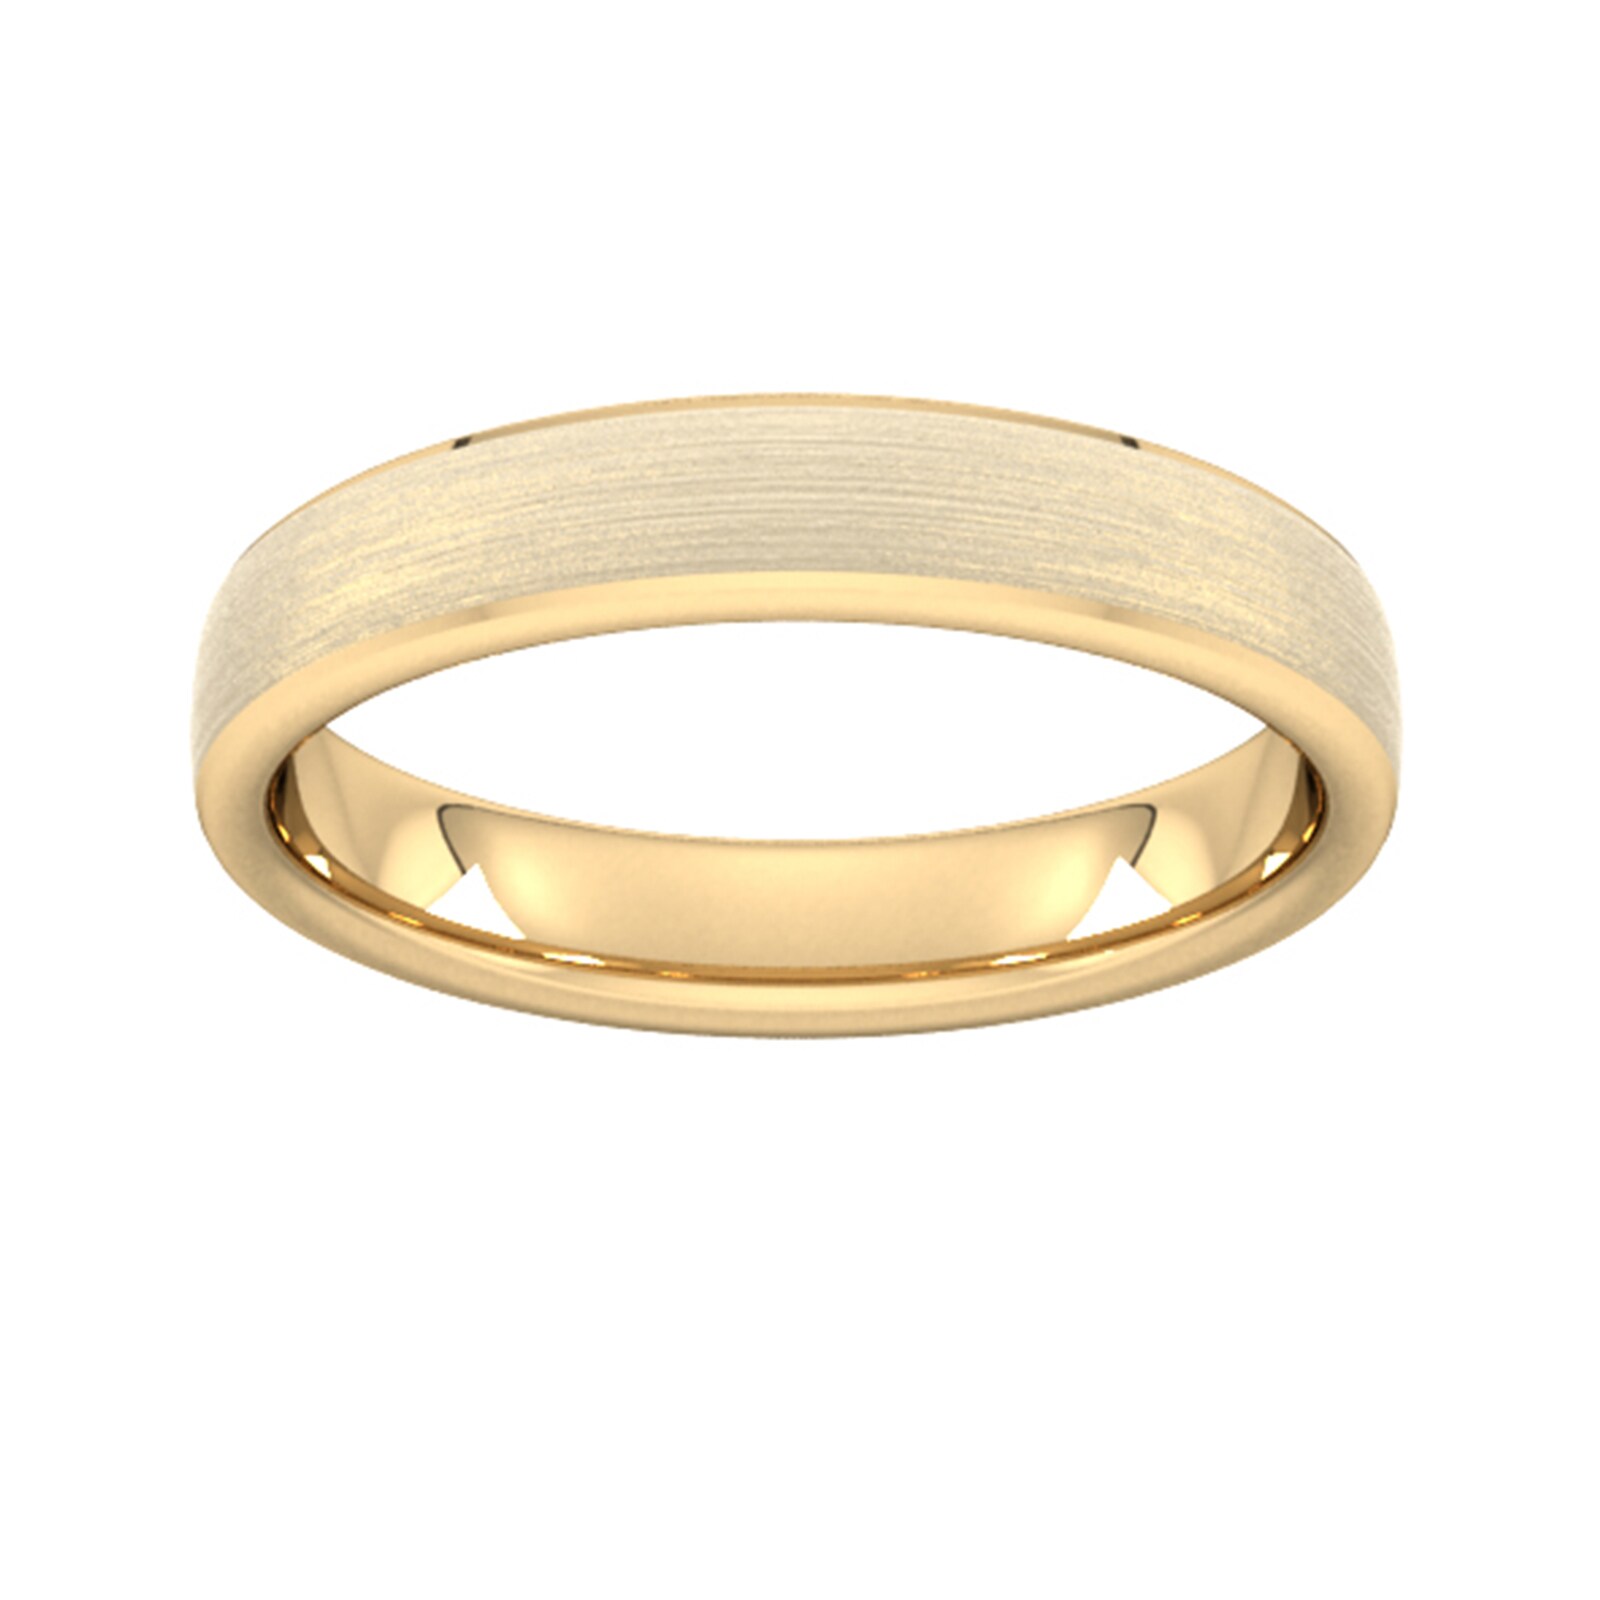 4mm Slight Court Standard Polished Chamfered Edges With Matt Centre Wedding Ring In 9 Carat Yellow Gold - Ring Size Q